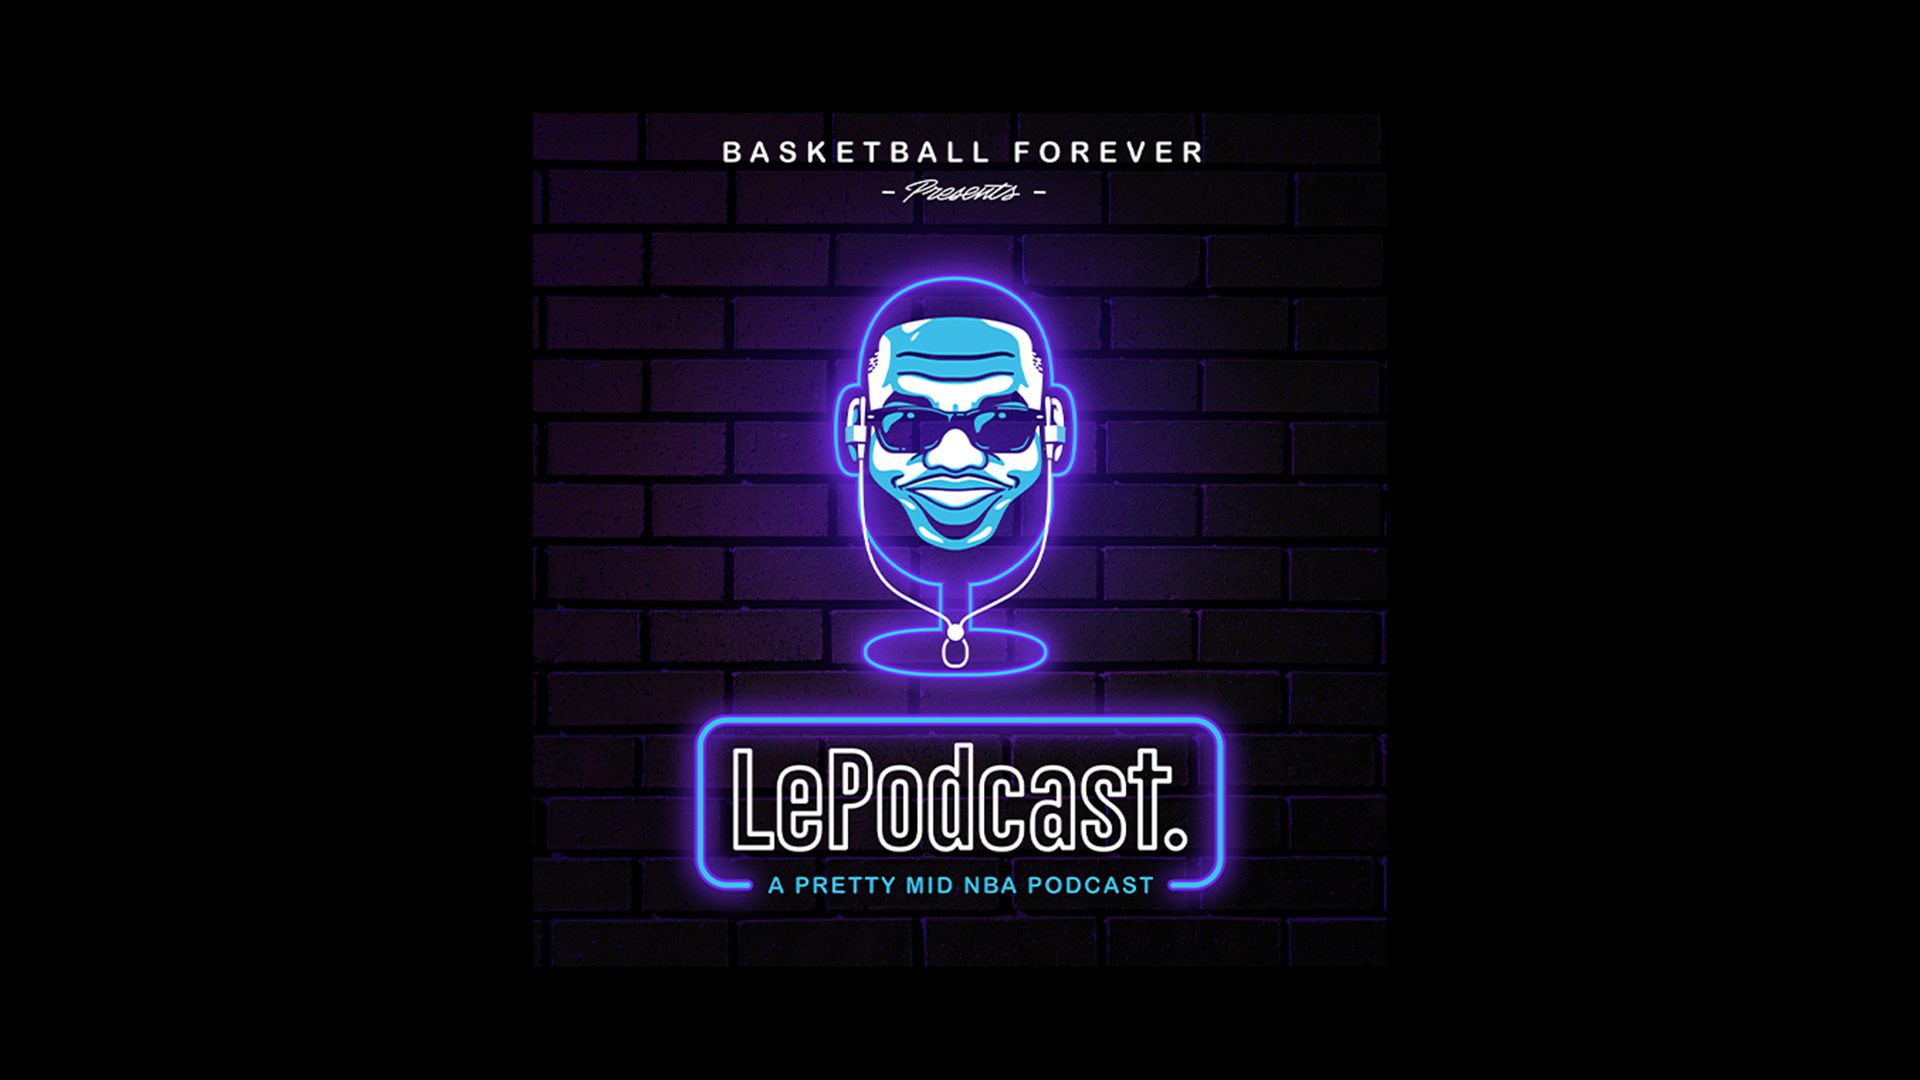 LePodcast Episode 59: Top 10 Eastern Conference Playoff Duos